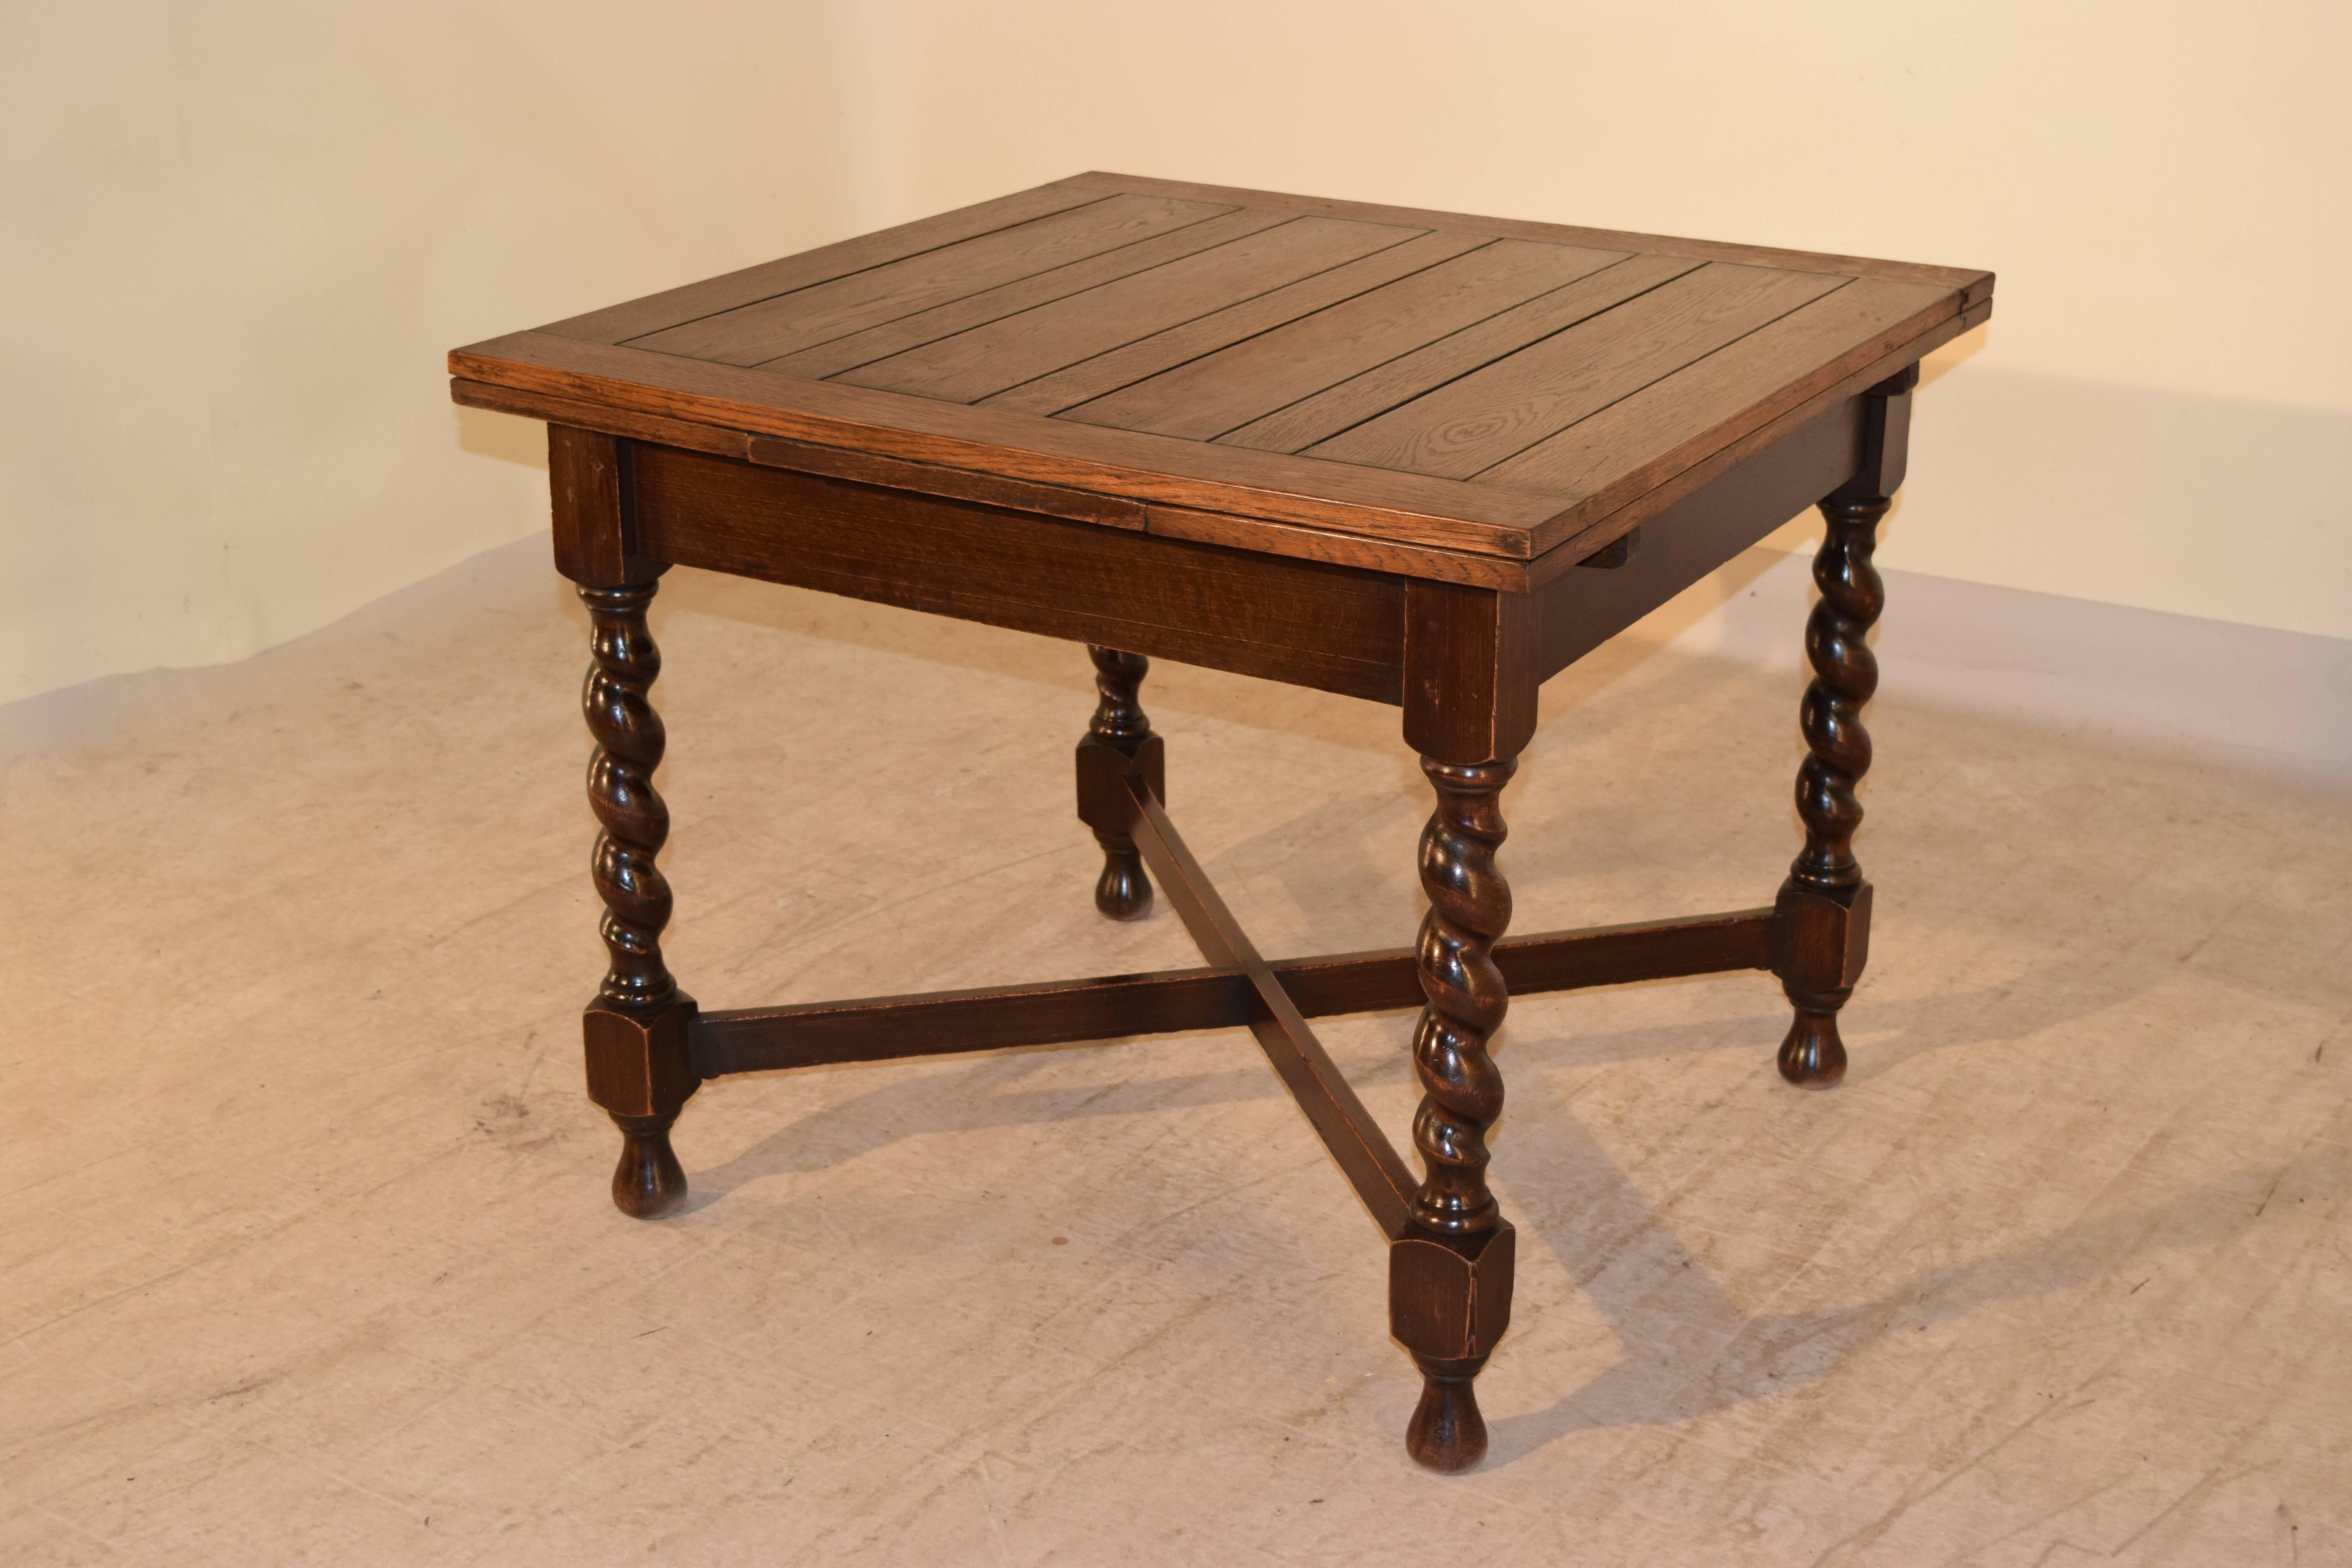 English oak draw leaf table with a paneled top and leaves, following down to a simple apron and supported on hand-turned barley twist legs, joined by cross stretchers, circa 1900. Raised on turned feet. Apron, 23